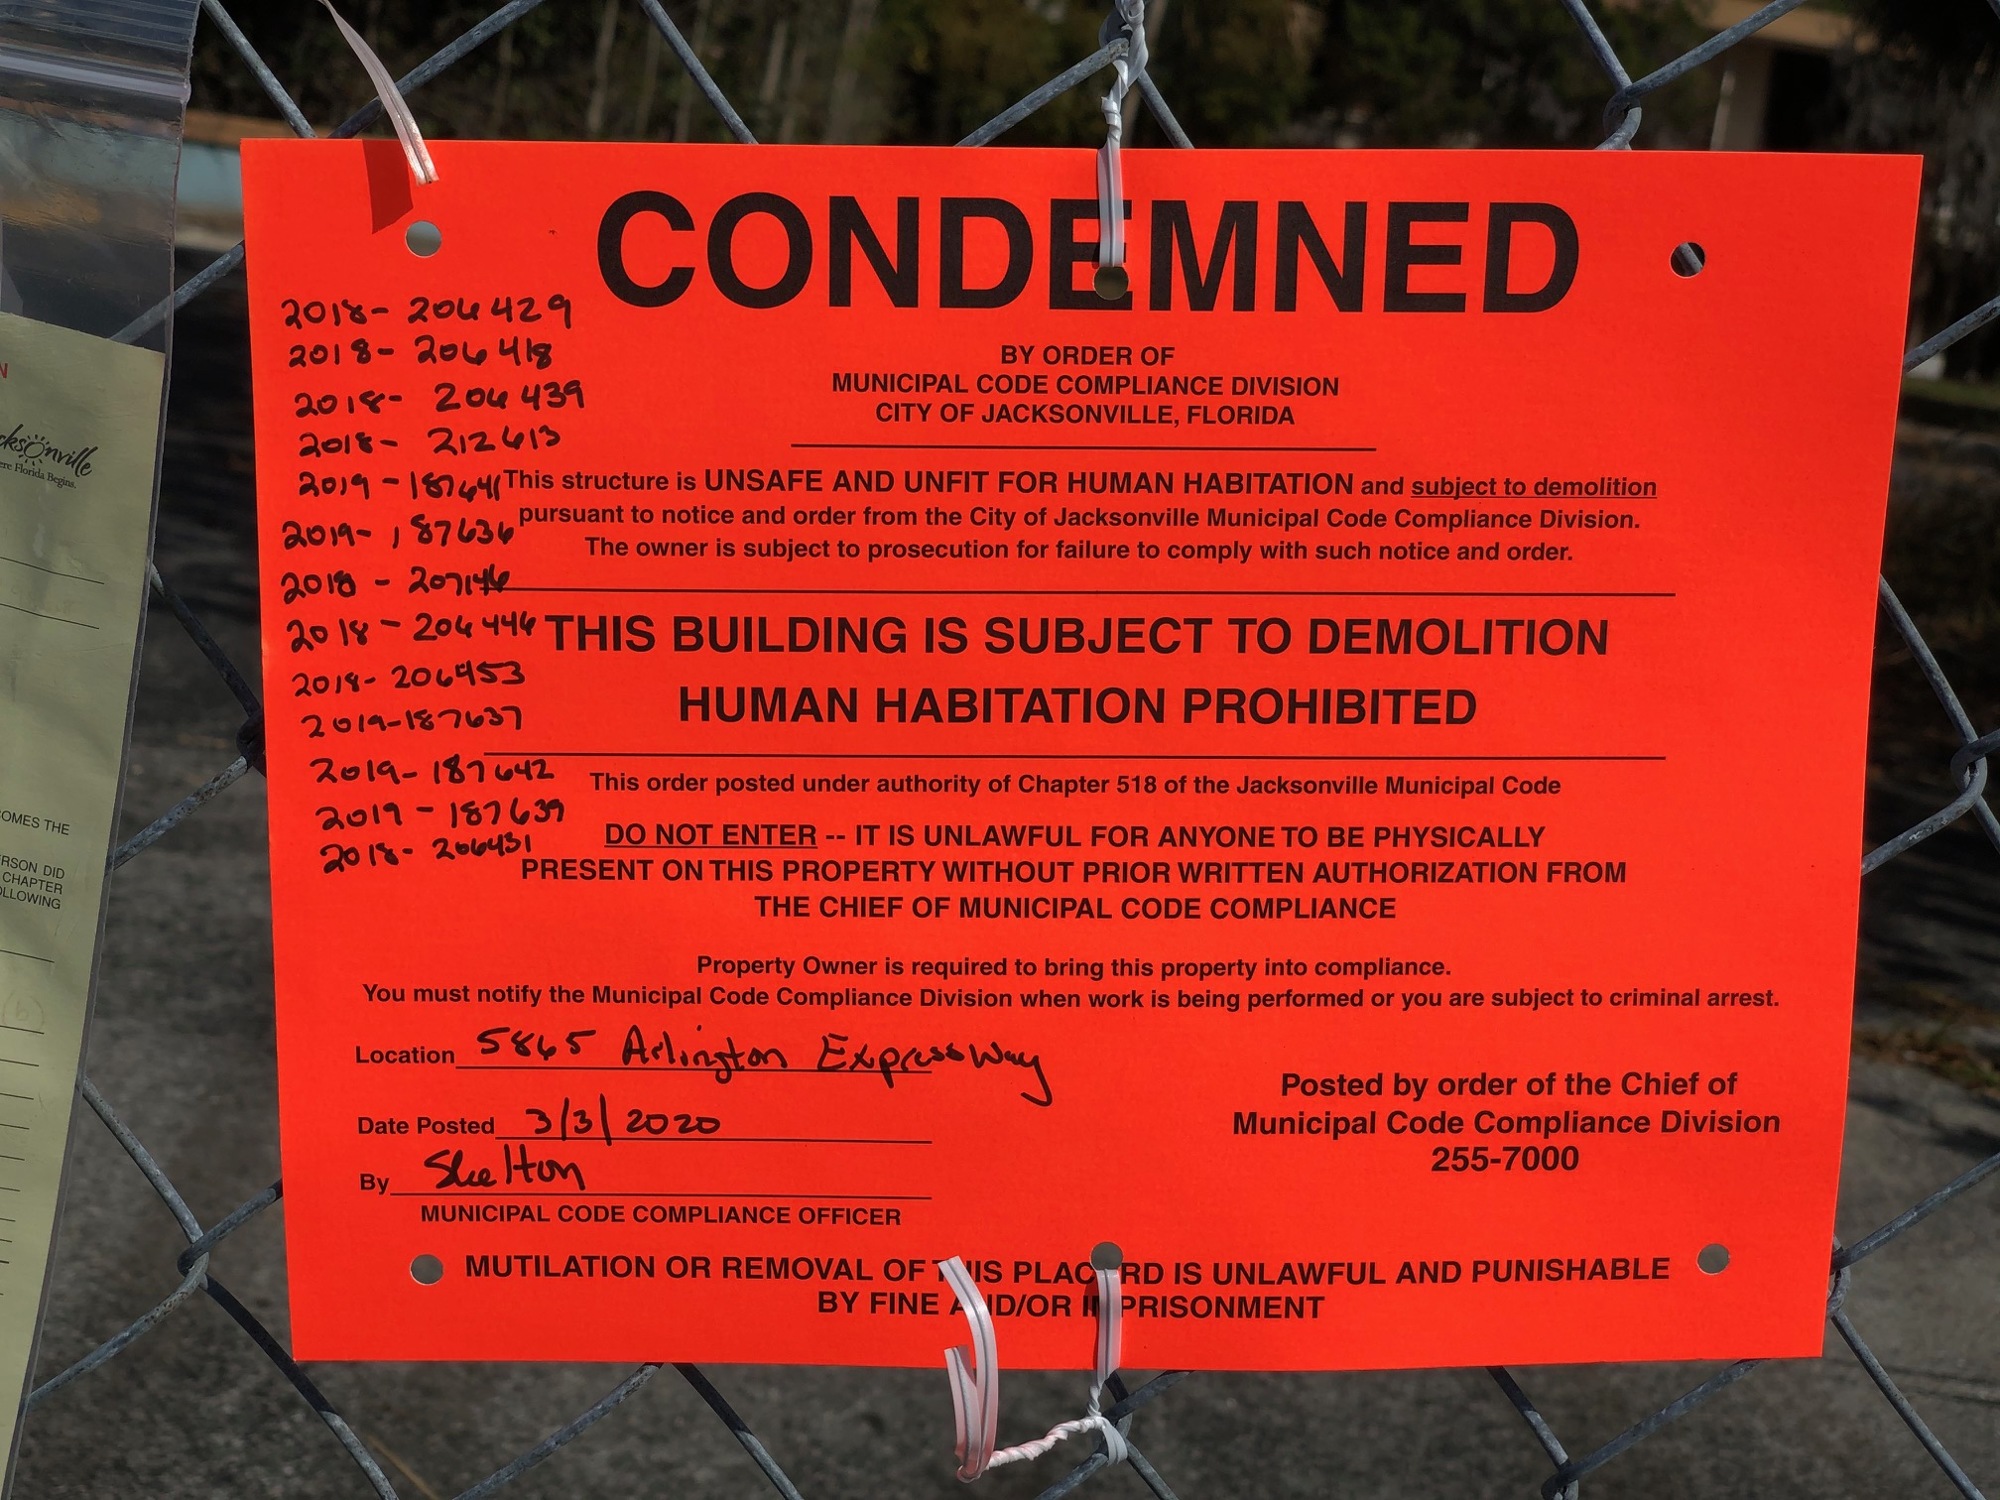 “This structure is unsafe and unfit for human habitation and subject to demolition,” says an orange “condemned” sign dated March 3 on the fence at 5865 Arlington Expressway.